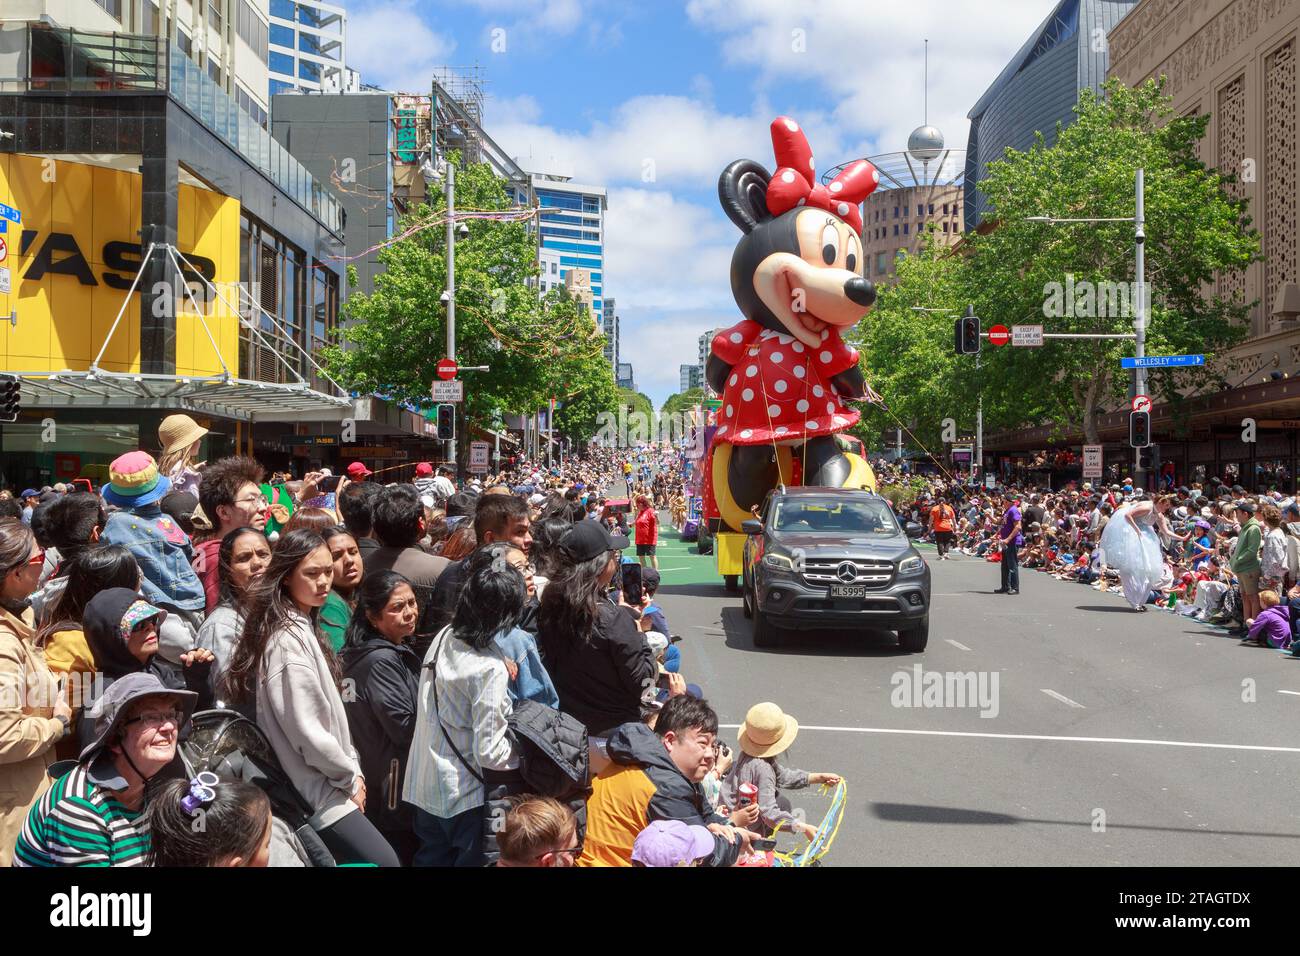 A Minnie Mouse balloon watched by a crowd of spectators at the Farmers Christmas Parade, Queen Street, Auckland, New Zealand Stock Photo